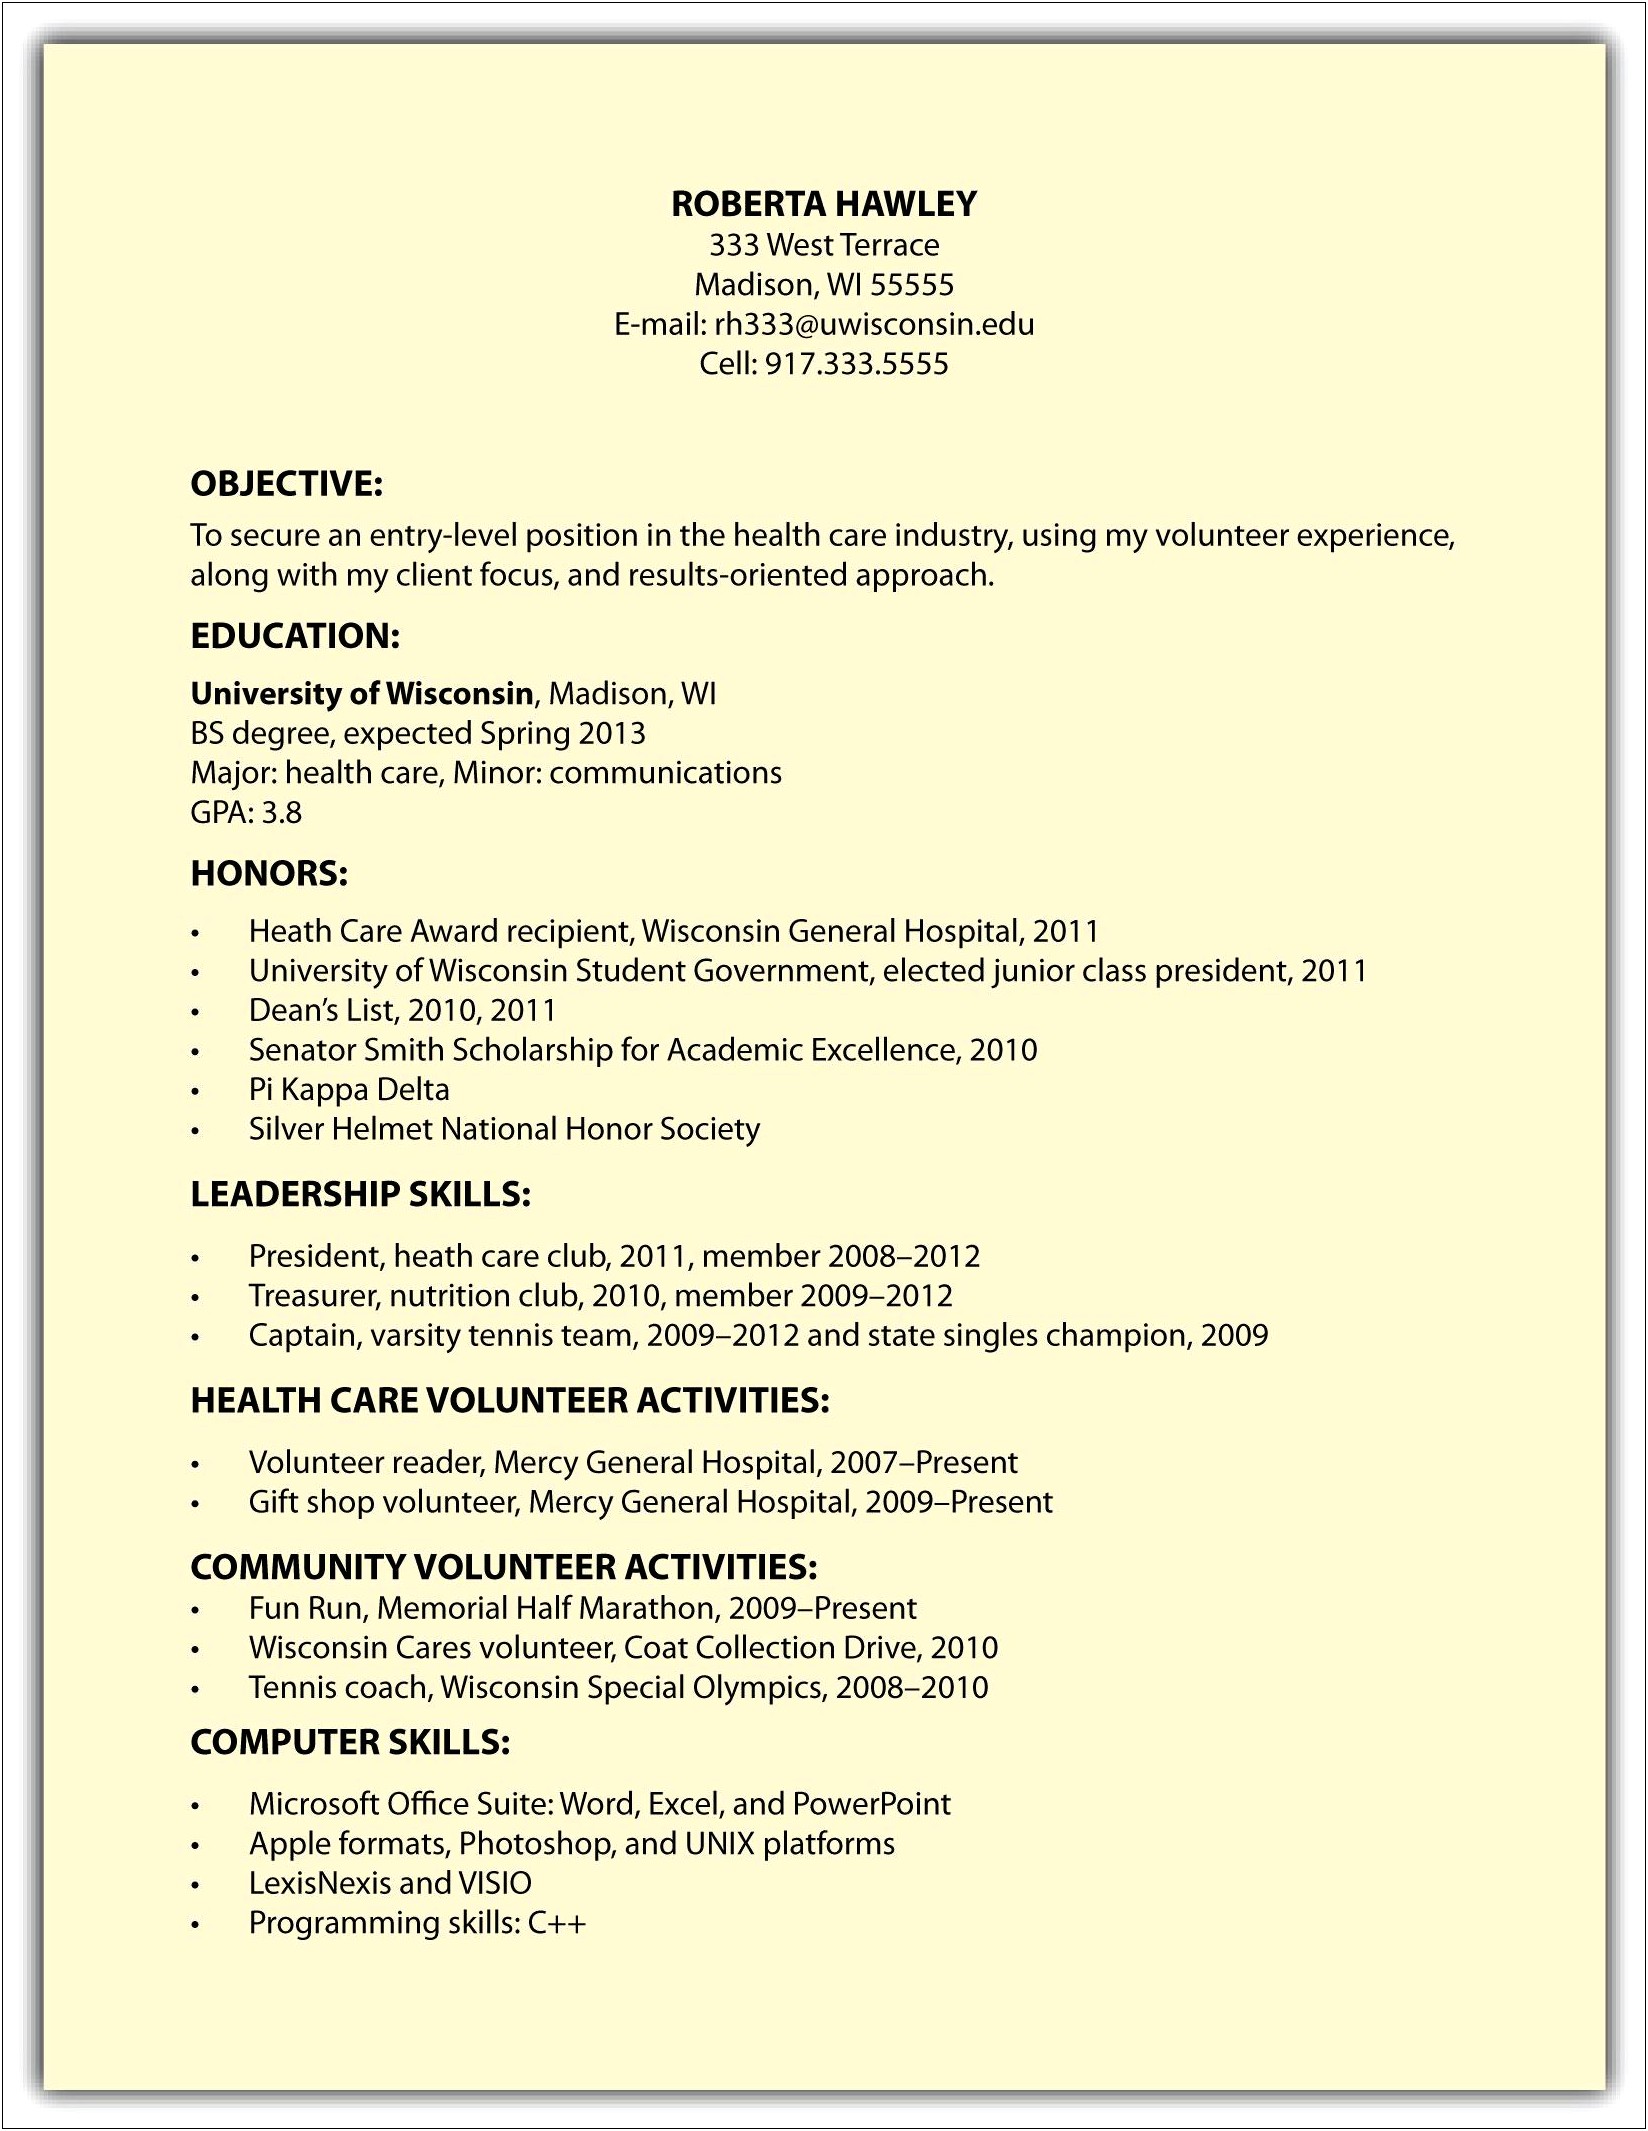 Resume Objections For A State Job